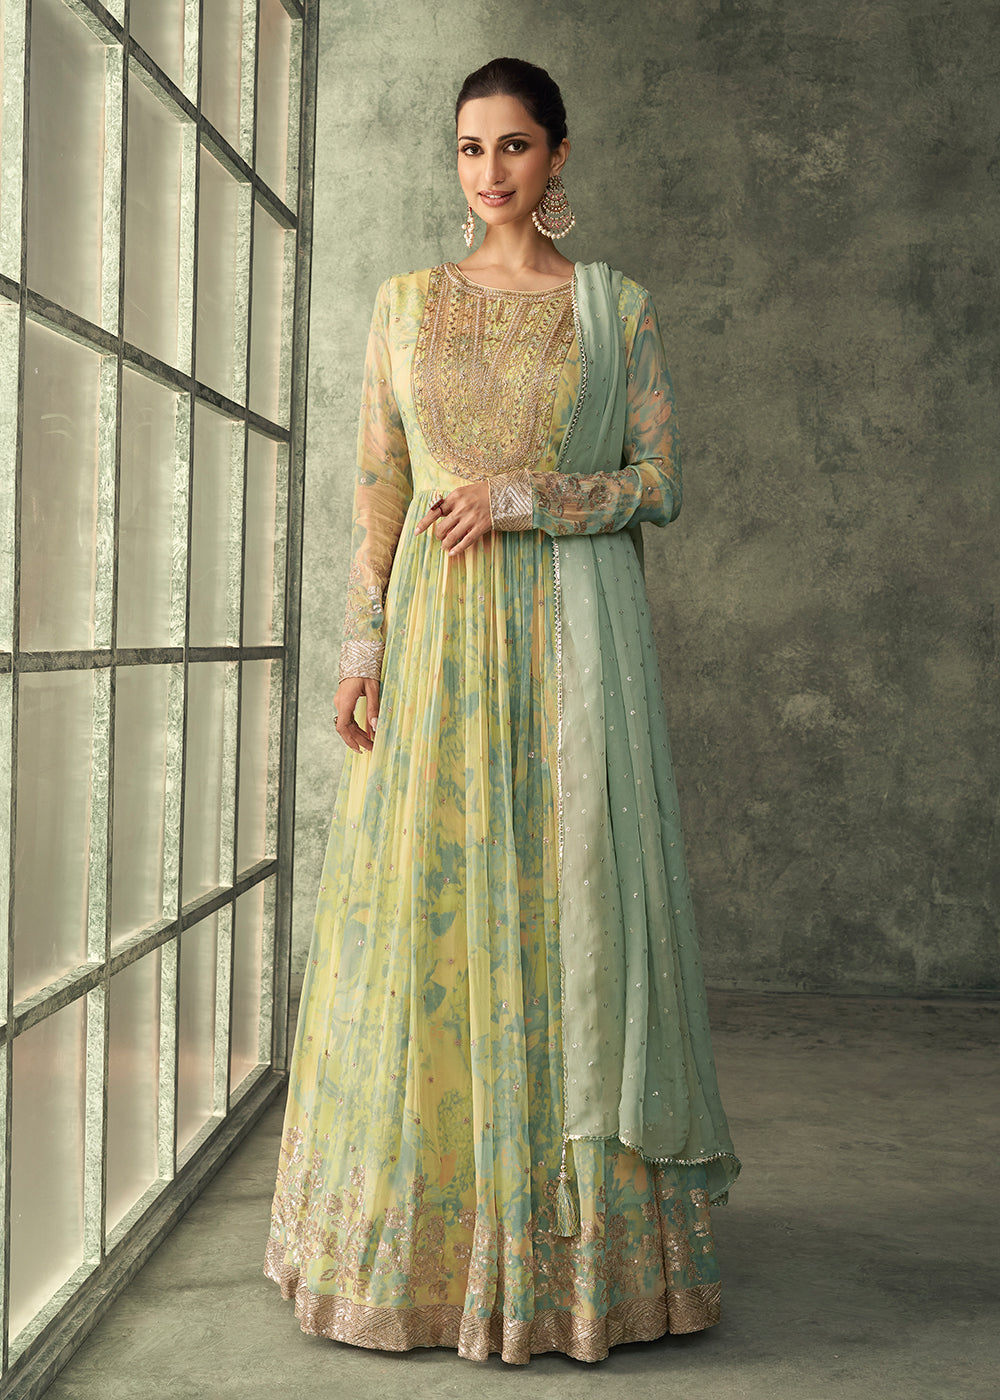 Buy Now Light Yellow Georgette Embroidered Designer Wedding Gown Online in USA, UK, Australia, Canada & Worldwide at Empress Clothing